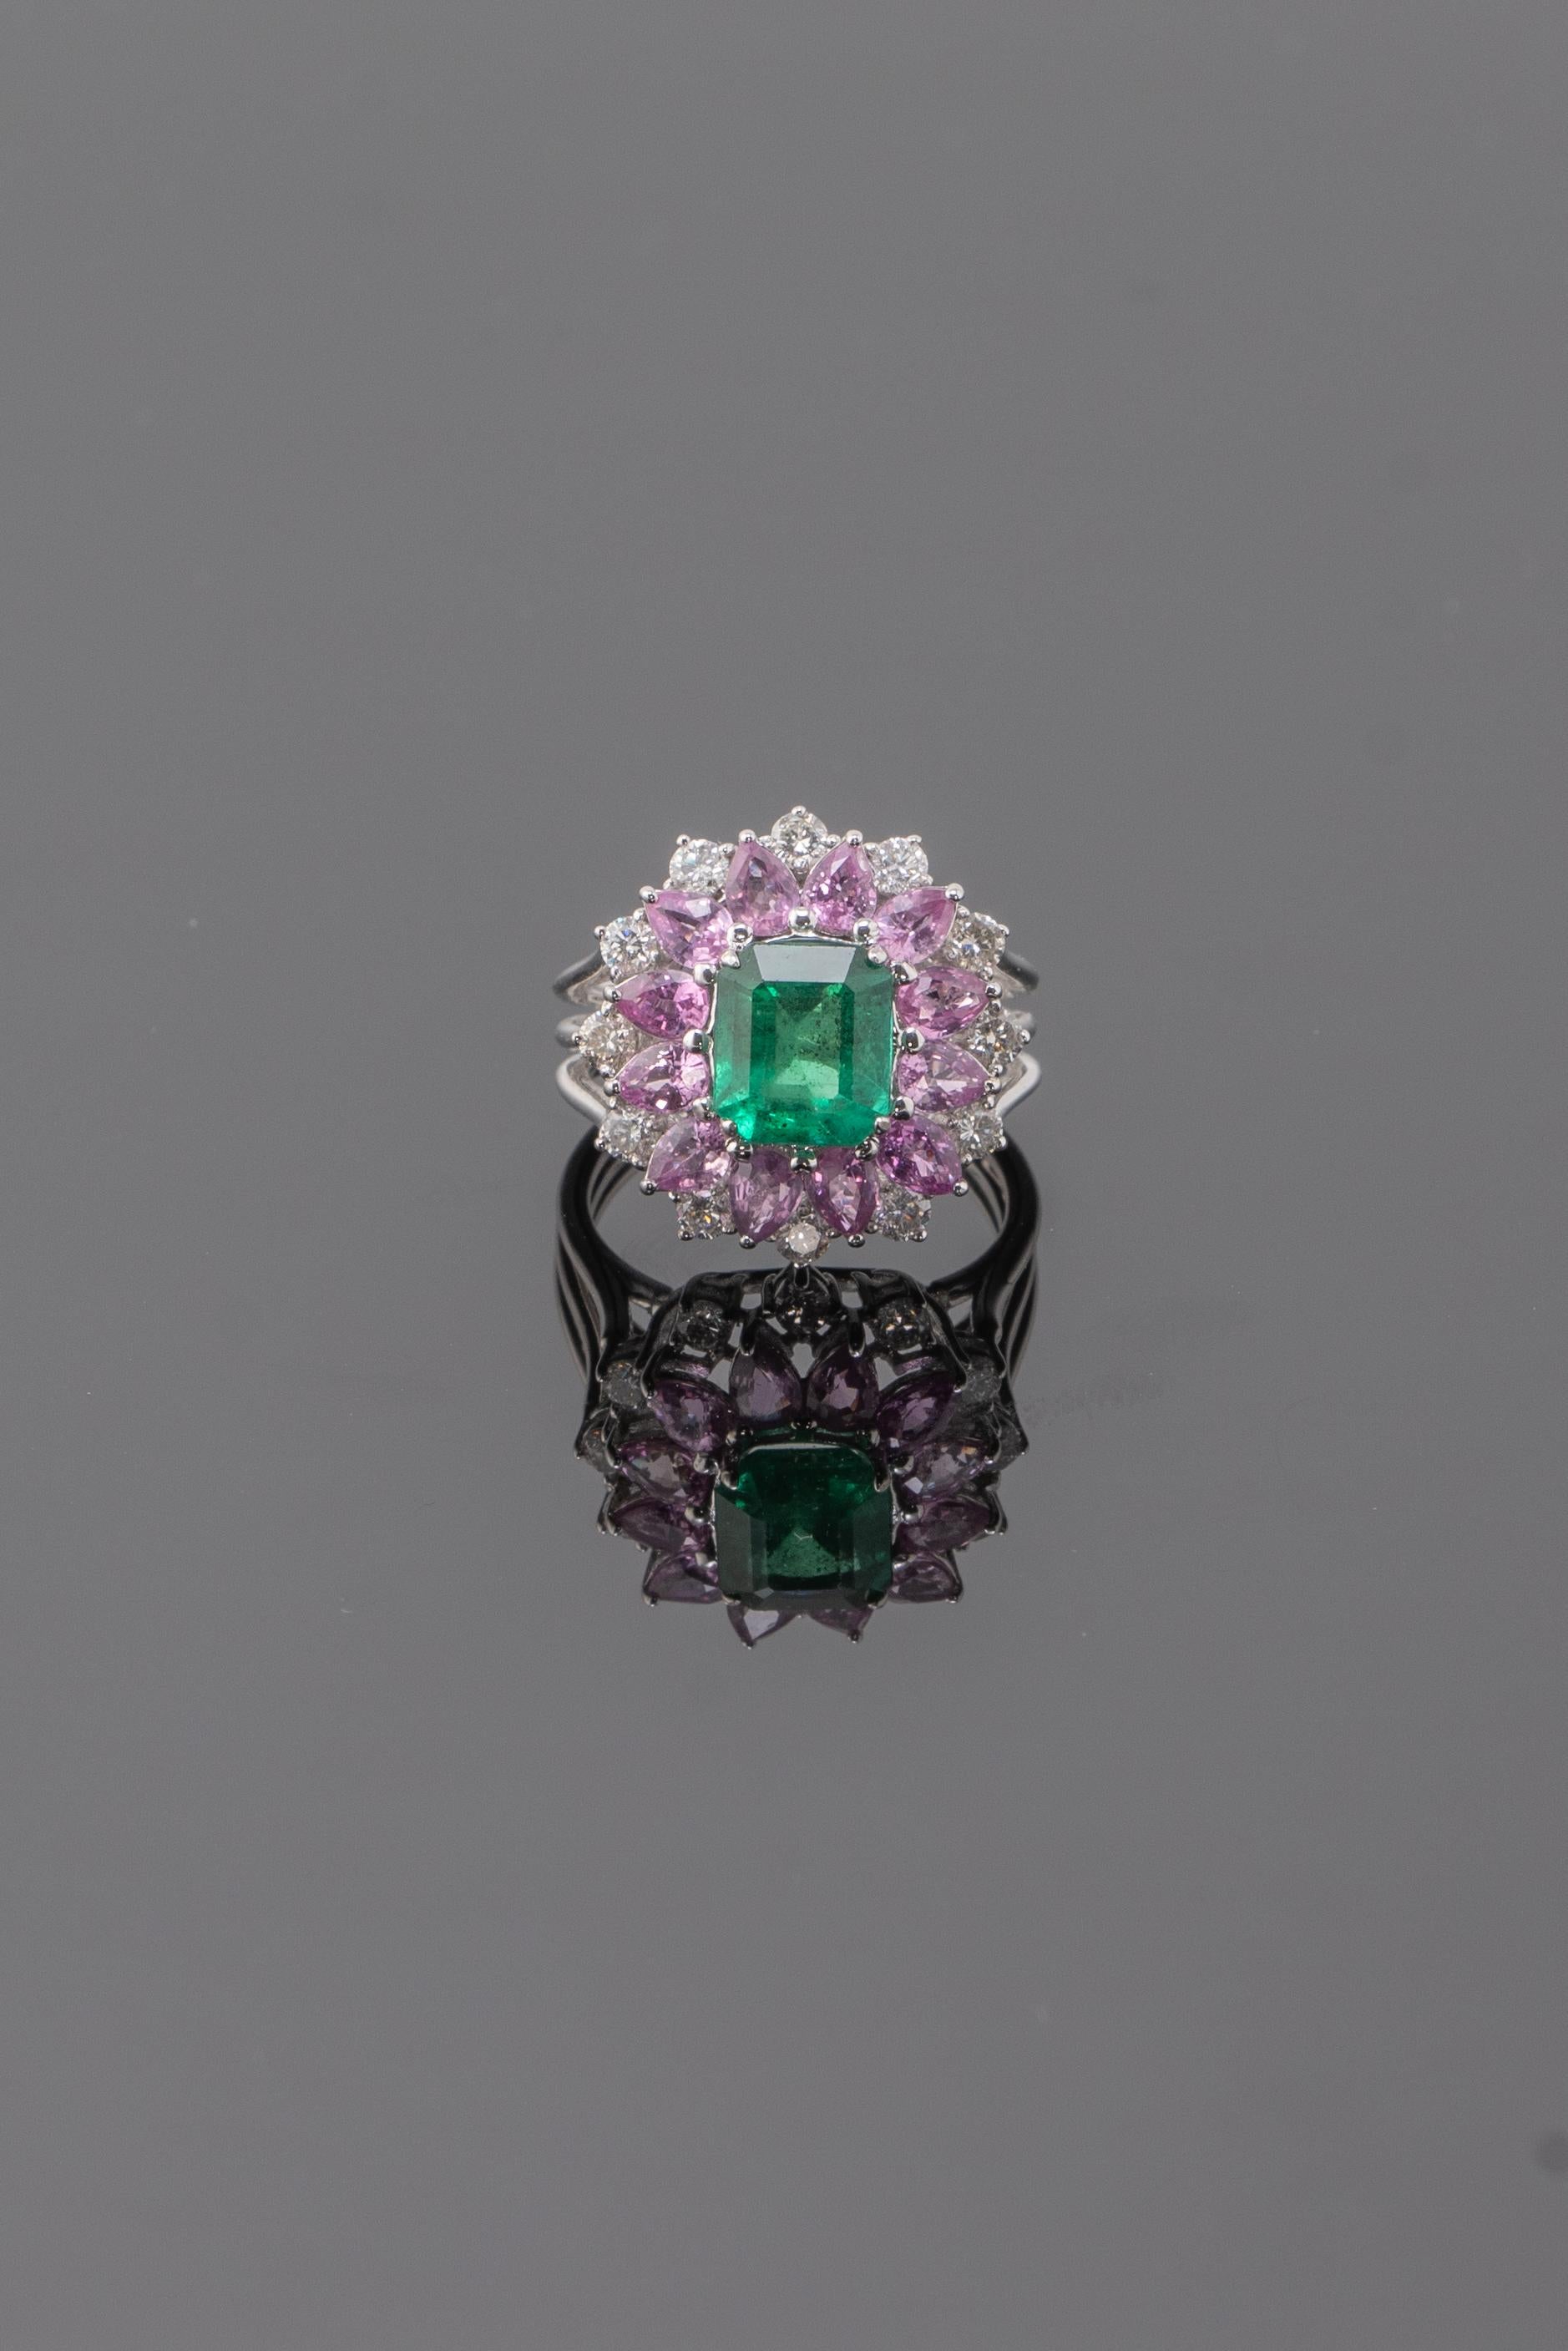 This ring features a stunning rich green 3 carat Emerald, surrounded with lovely 2.82 carats Pink Sapphire and 0.69 carats Diamonds that makes it eye-catching, all set in 7.83 grams of solid 18K White Gold. Currently sized at US 6, can be